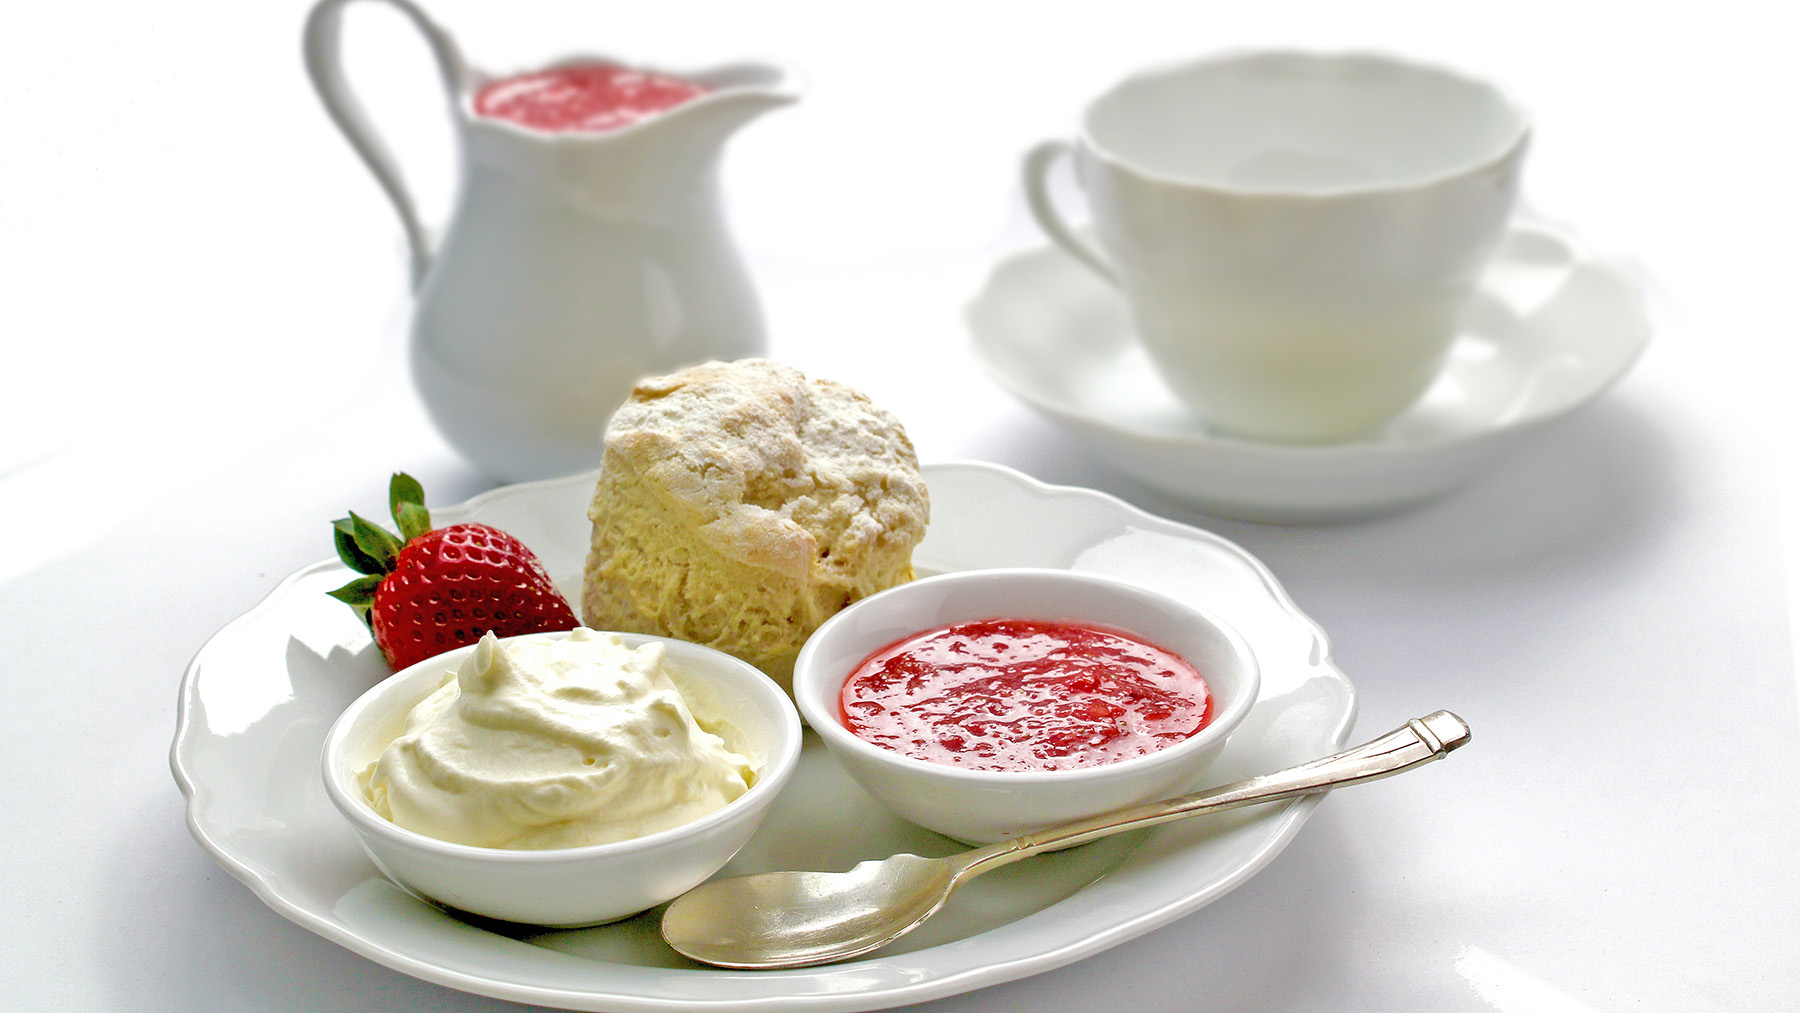 Color photo of tea and a scone with toppings from Creative Commons (courtesy of RawPixel.com)